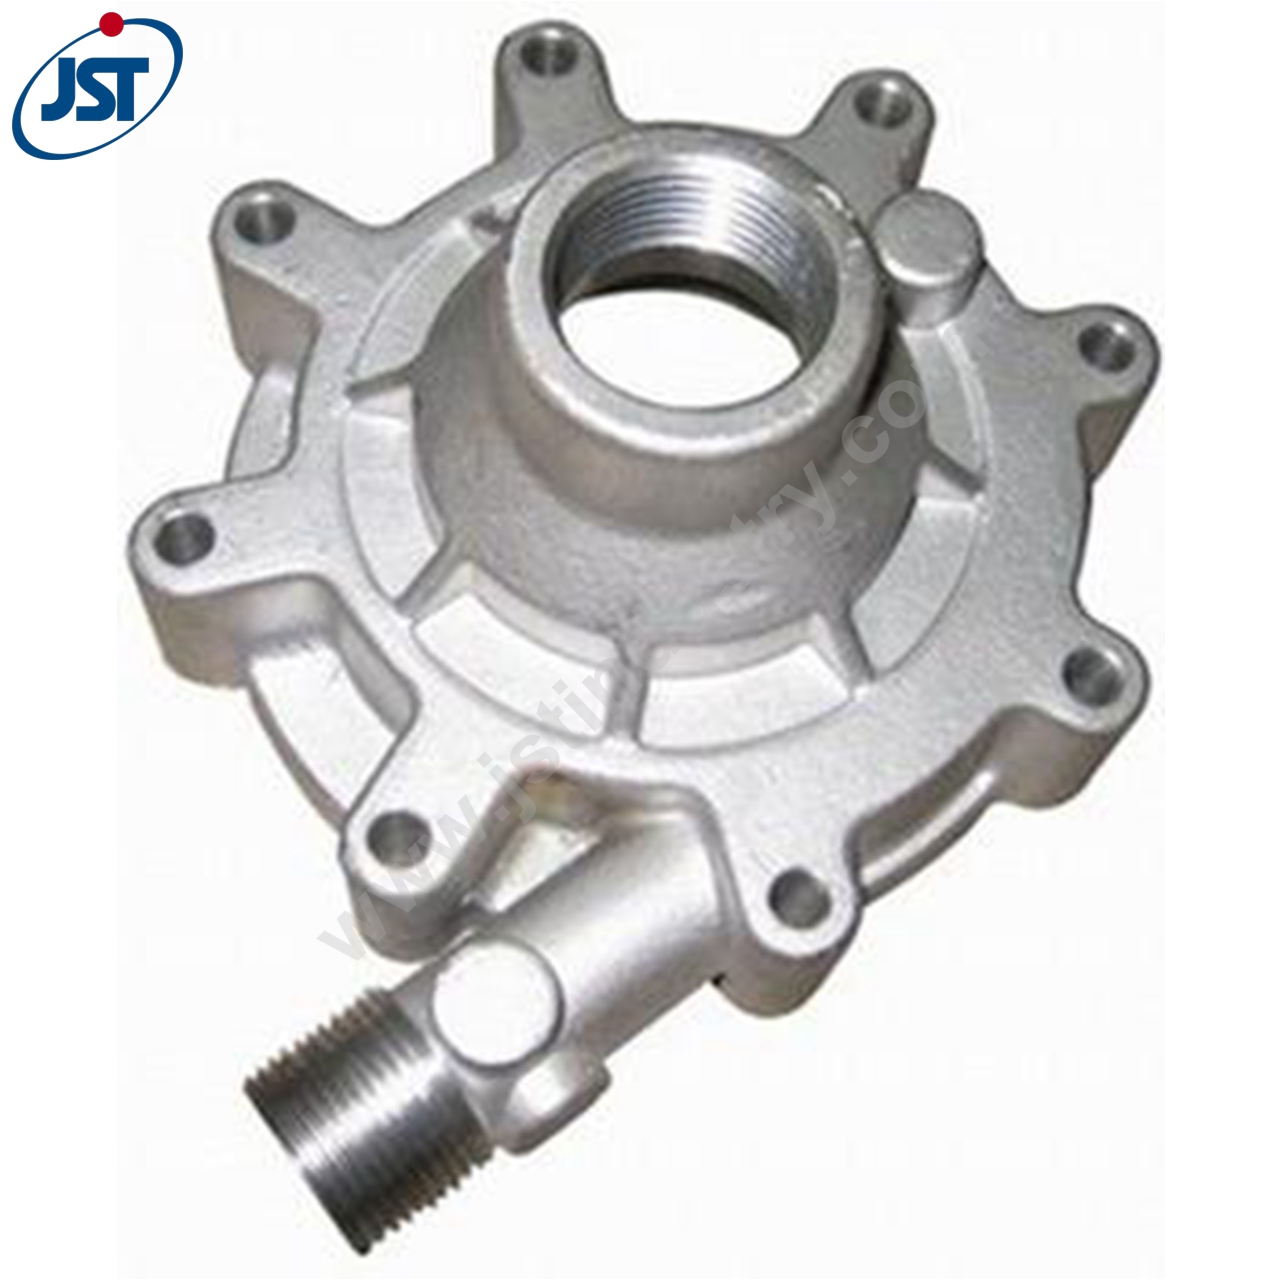 OEM Precision Stainless Steel Investment Casting 